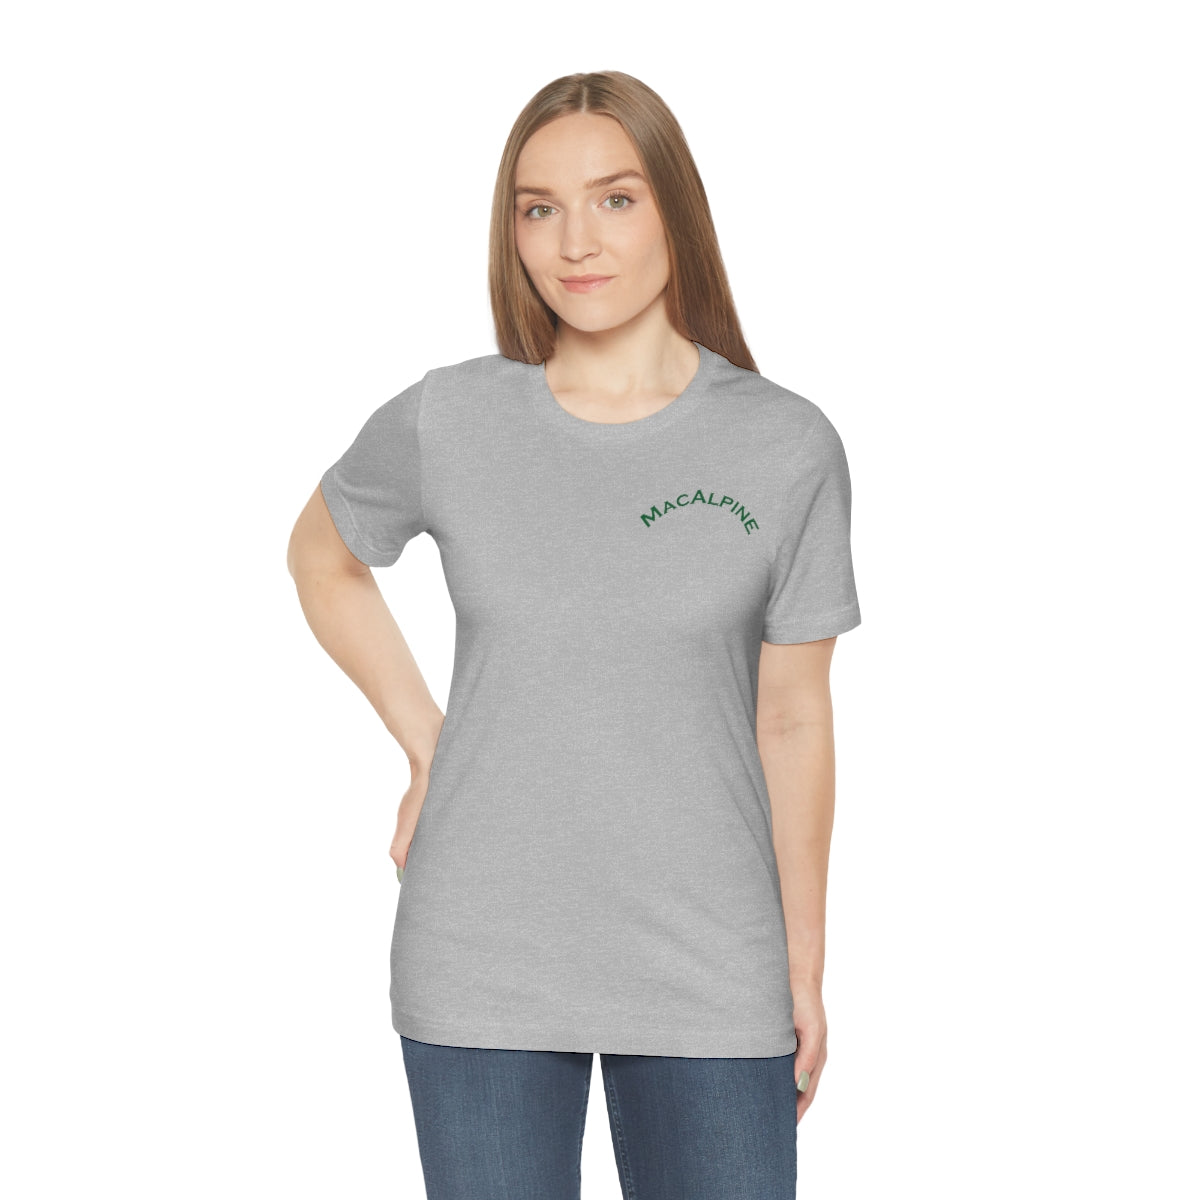 Hills and Streams and MacAlpines Unisex Tee